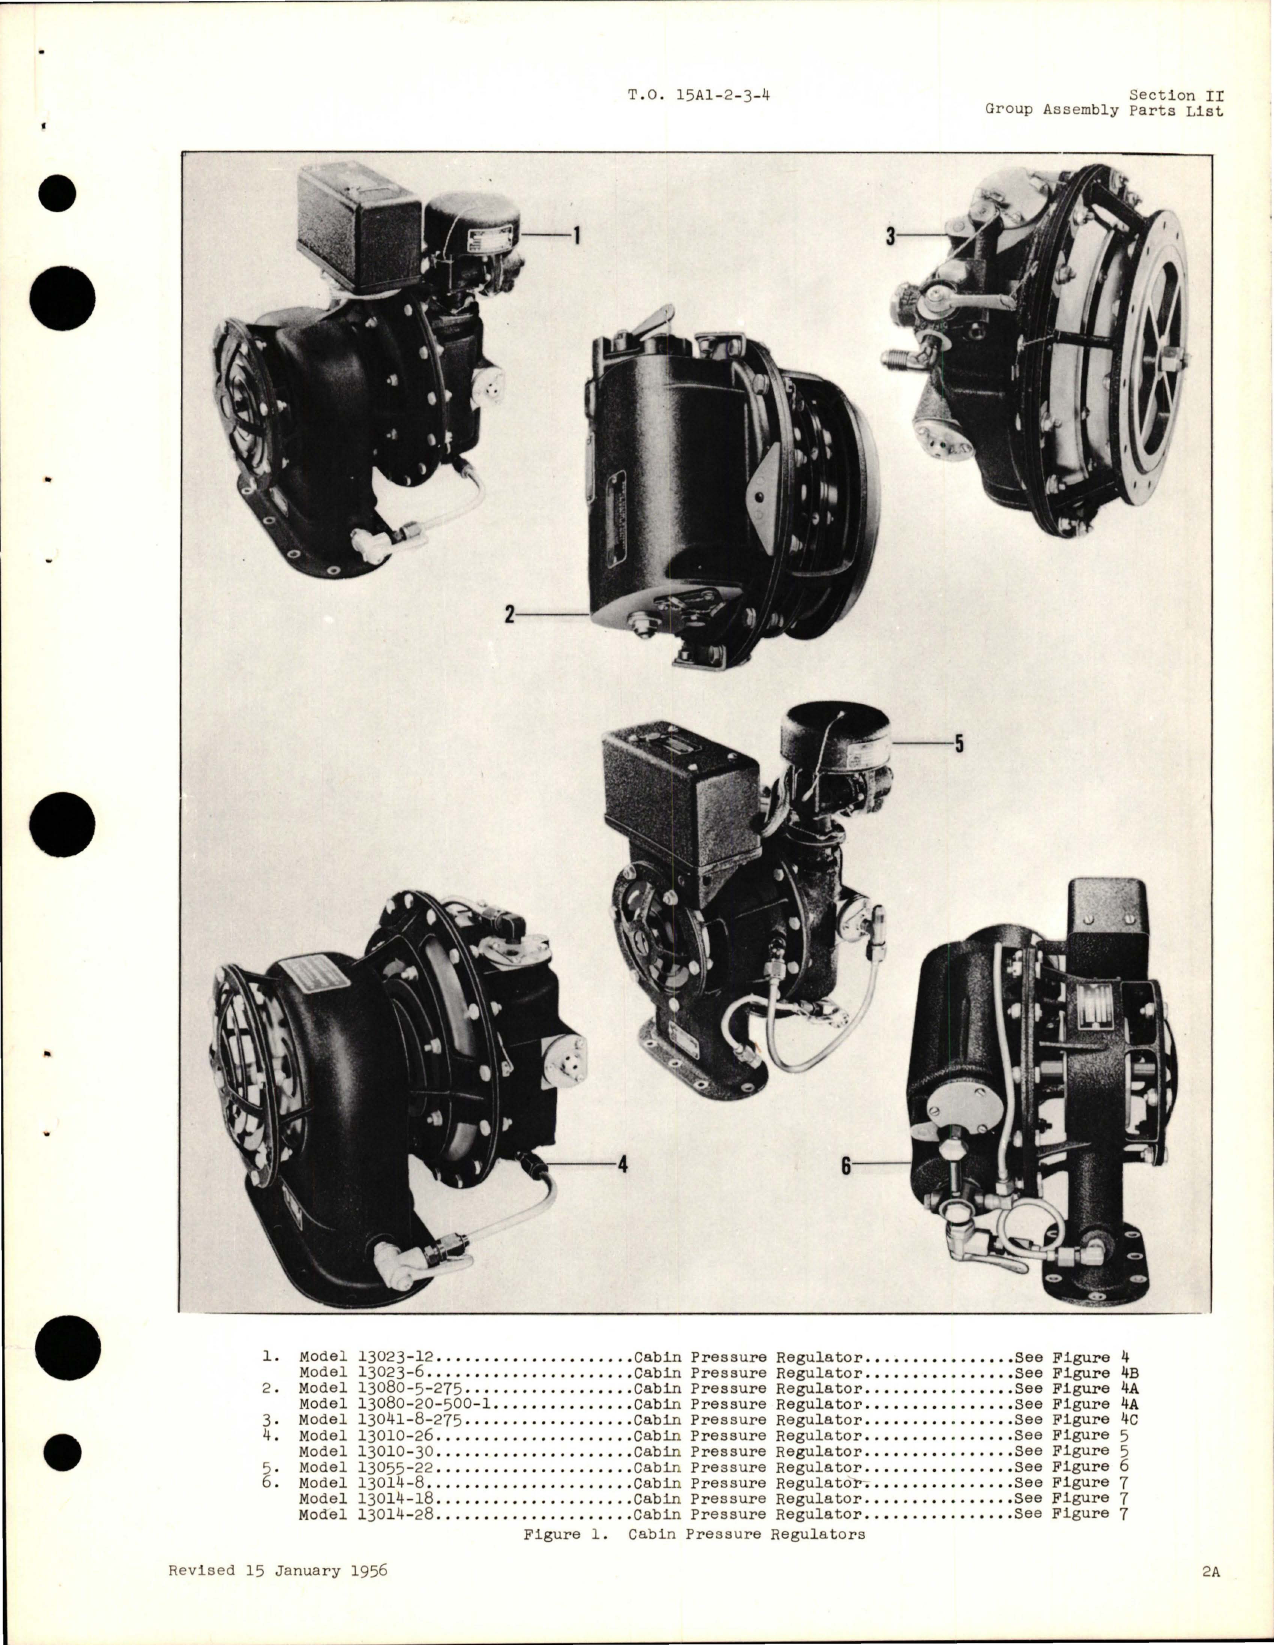 Sample page 7 from AirCorps Library document: Parts Catalog for Cabin Pressure Regulators